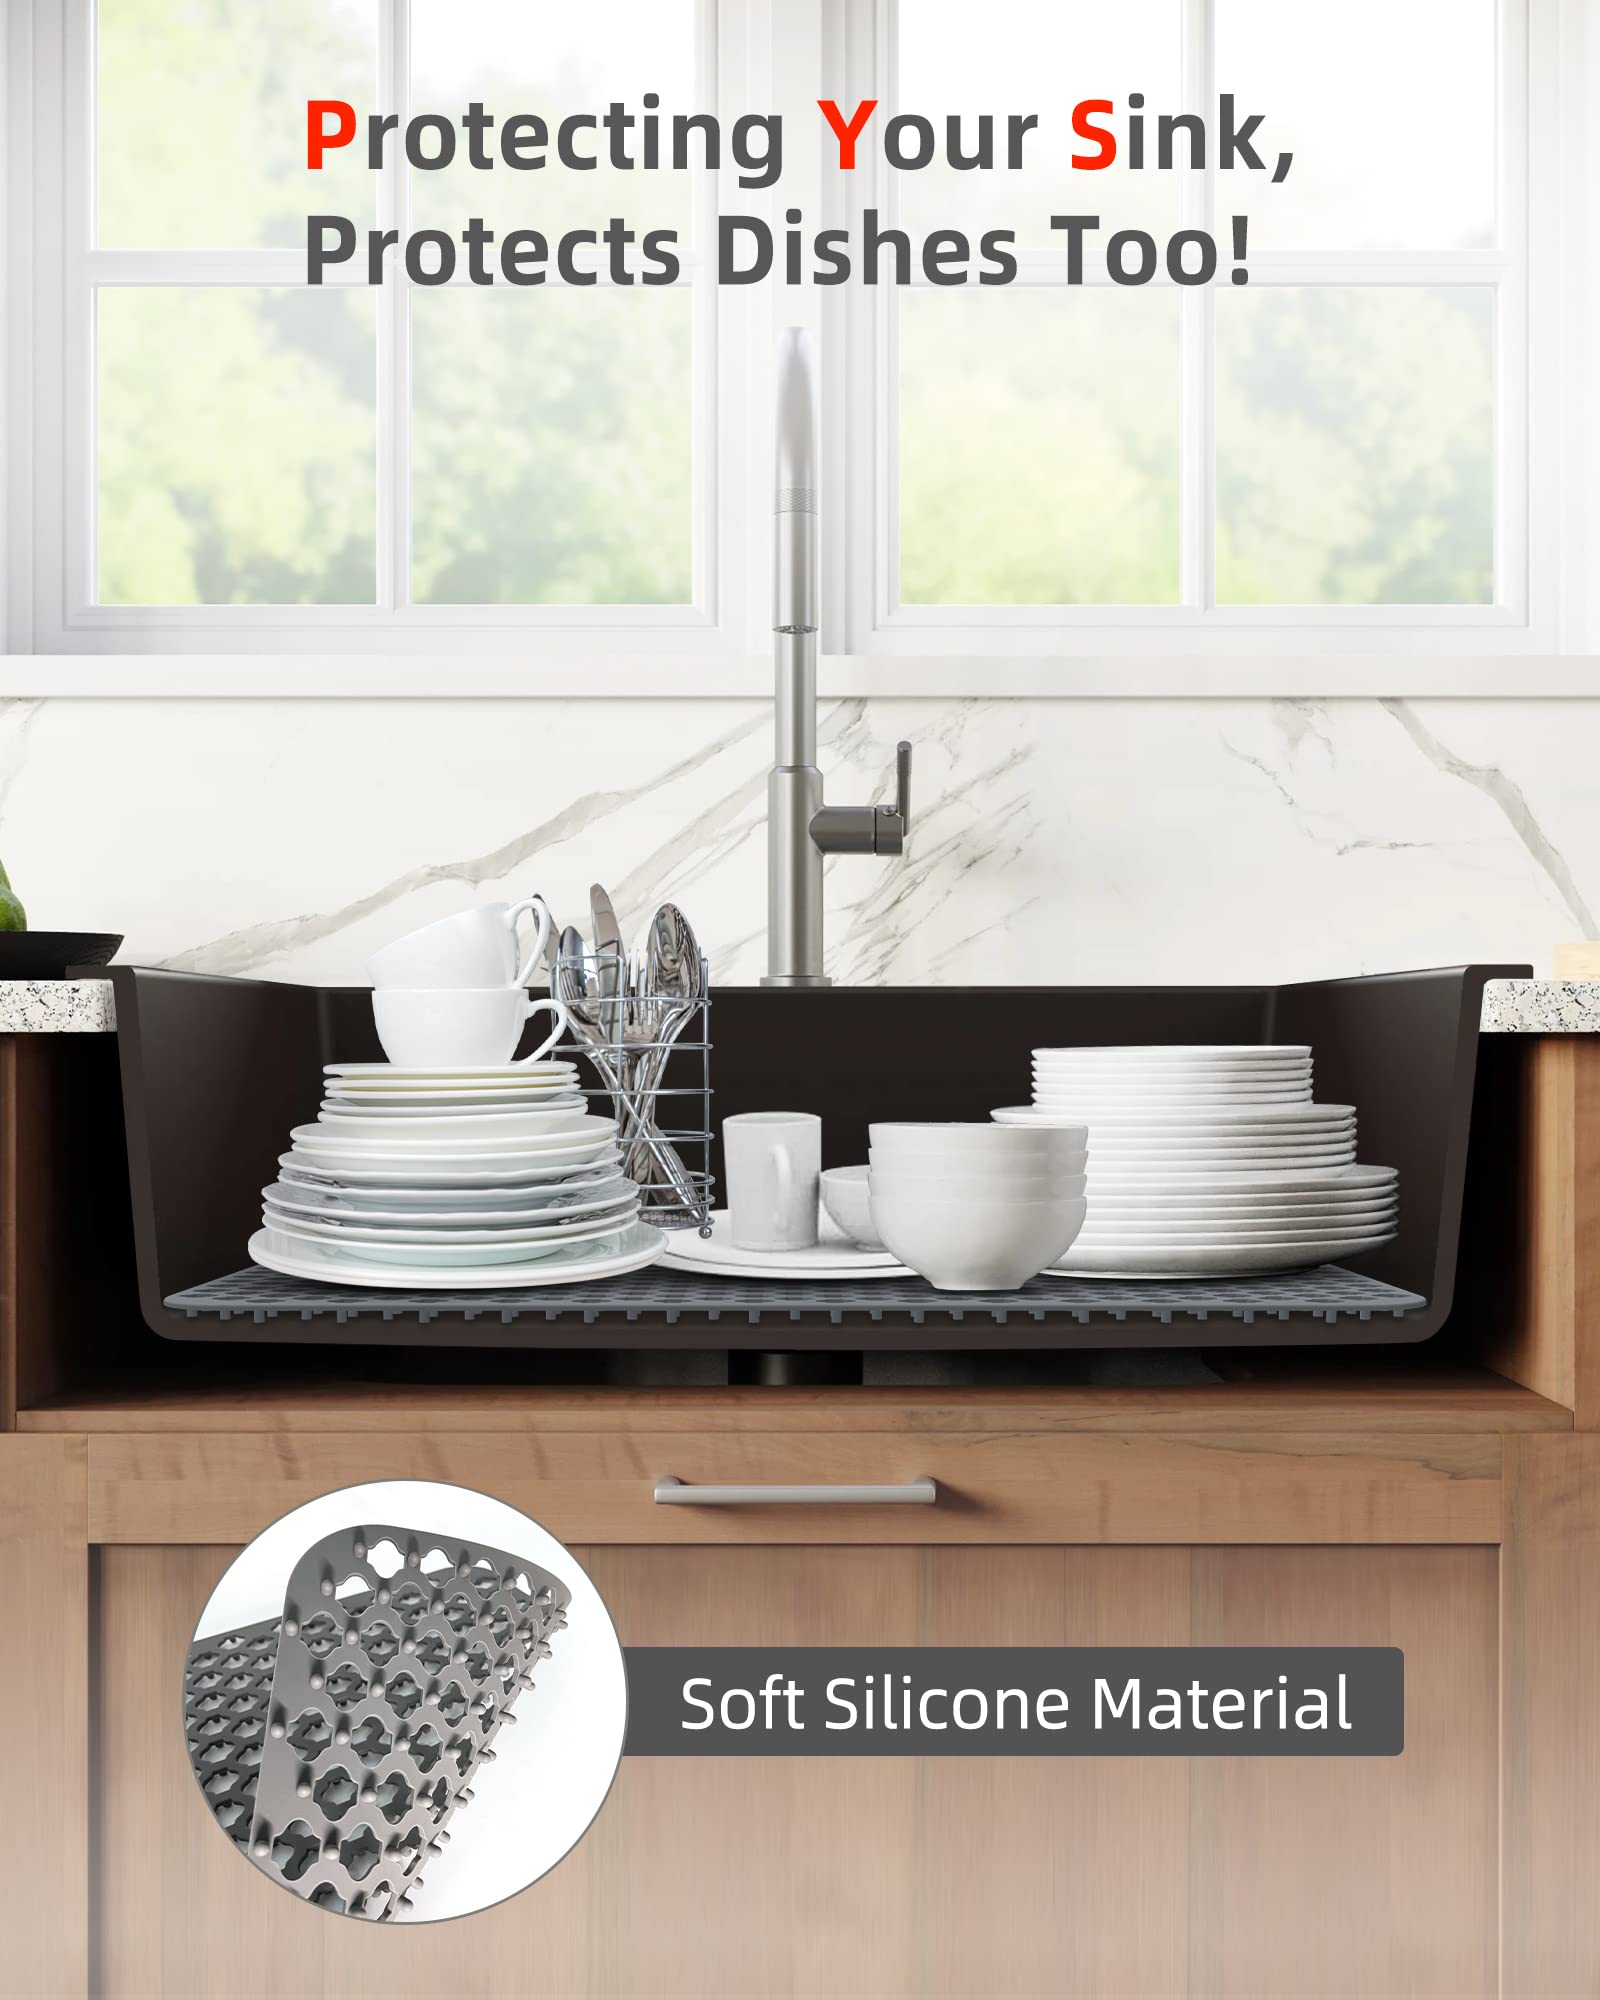 Makaduo Sink Protectors for Kitchen Sink, Silicone Kitchen Sink Accessories, Sink Mats for Stainless Steel Sink, Porcelain Sink, Large Folding Dish Drying Mat, Heat Resistant, Non-Slip, Grey